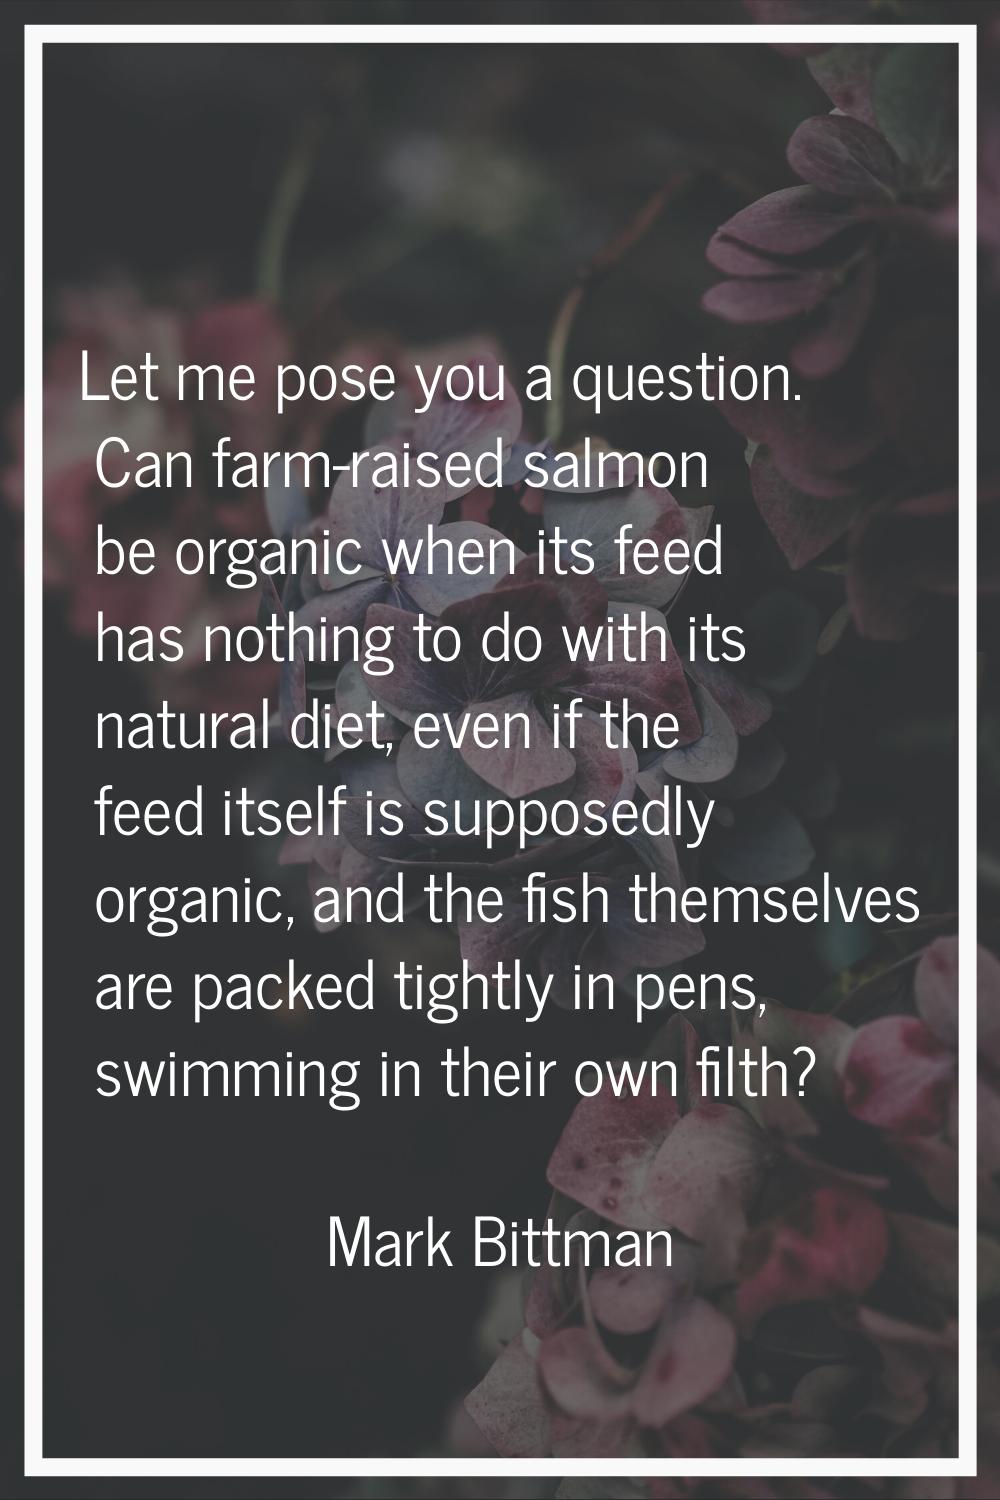 Let me pose you a question. Can farm-raised salmon be organic when its feed has nothing to do with 